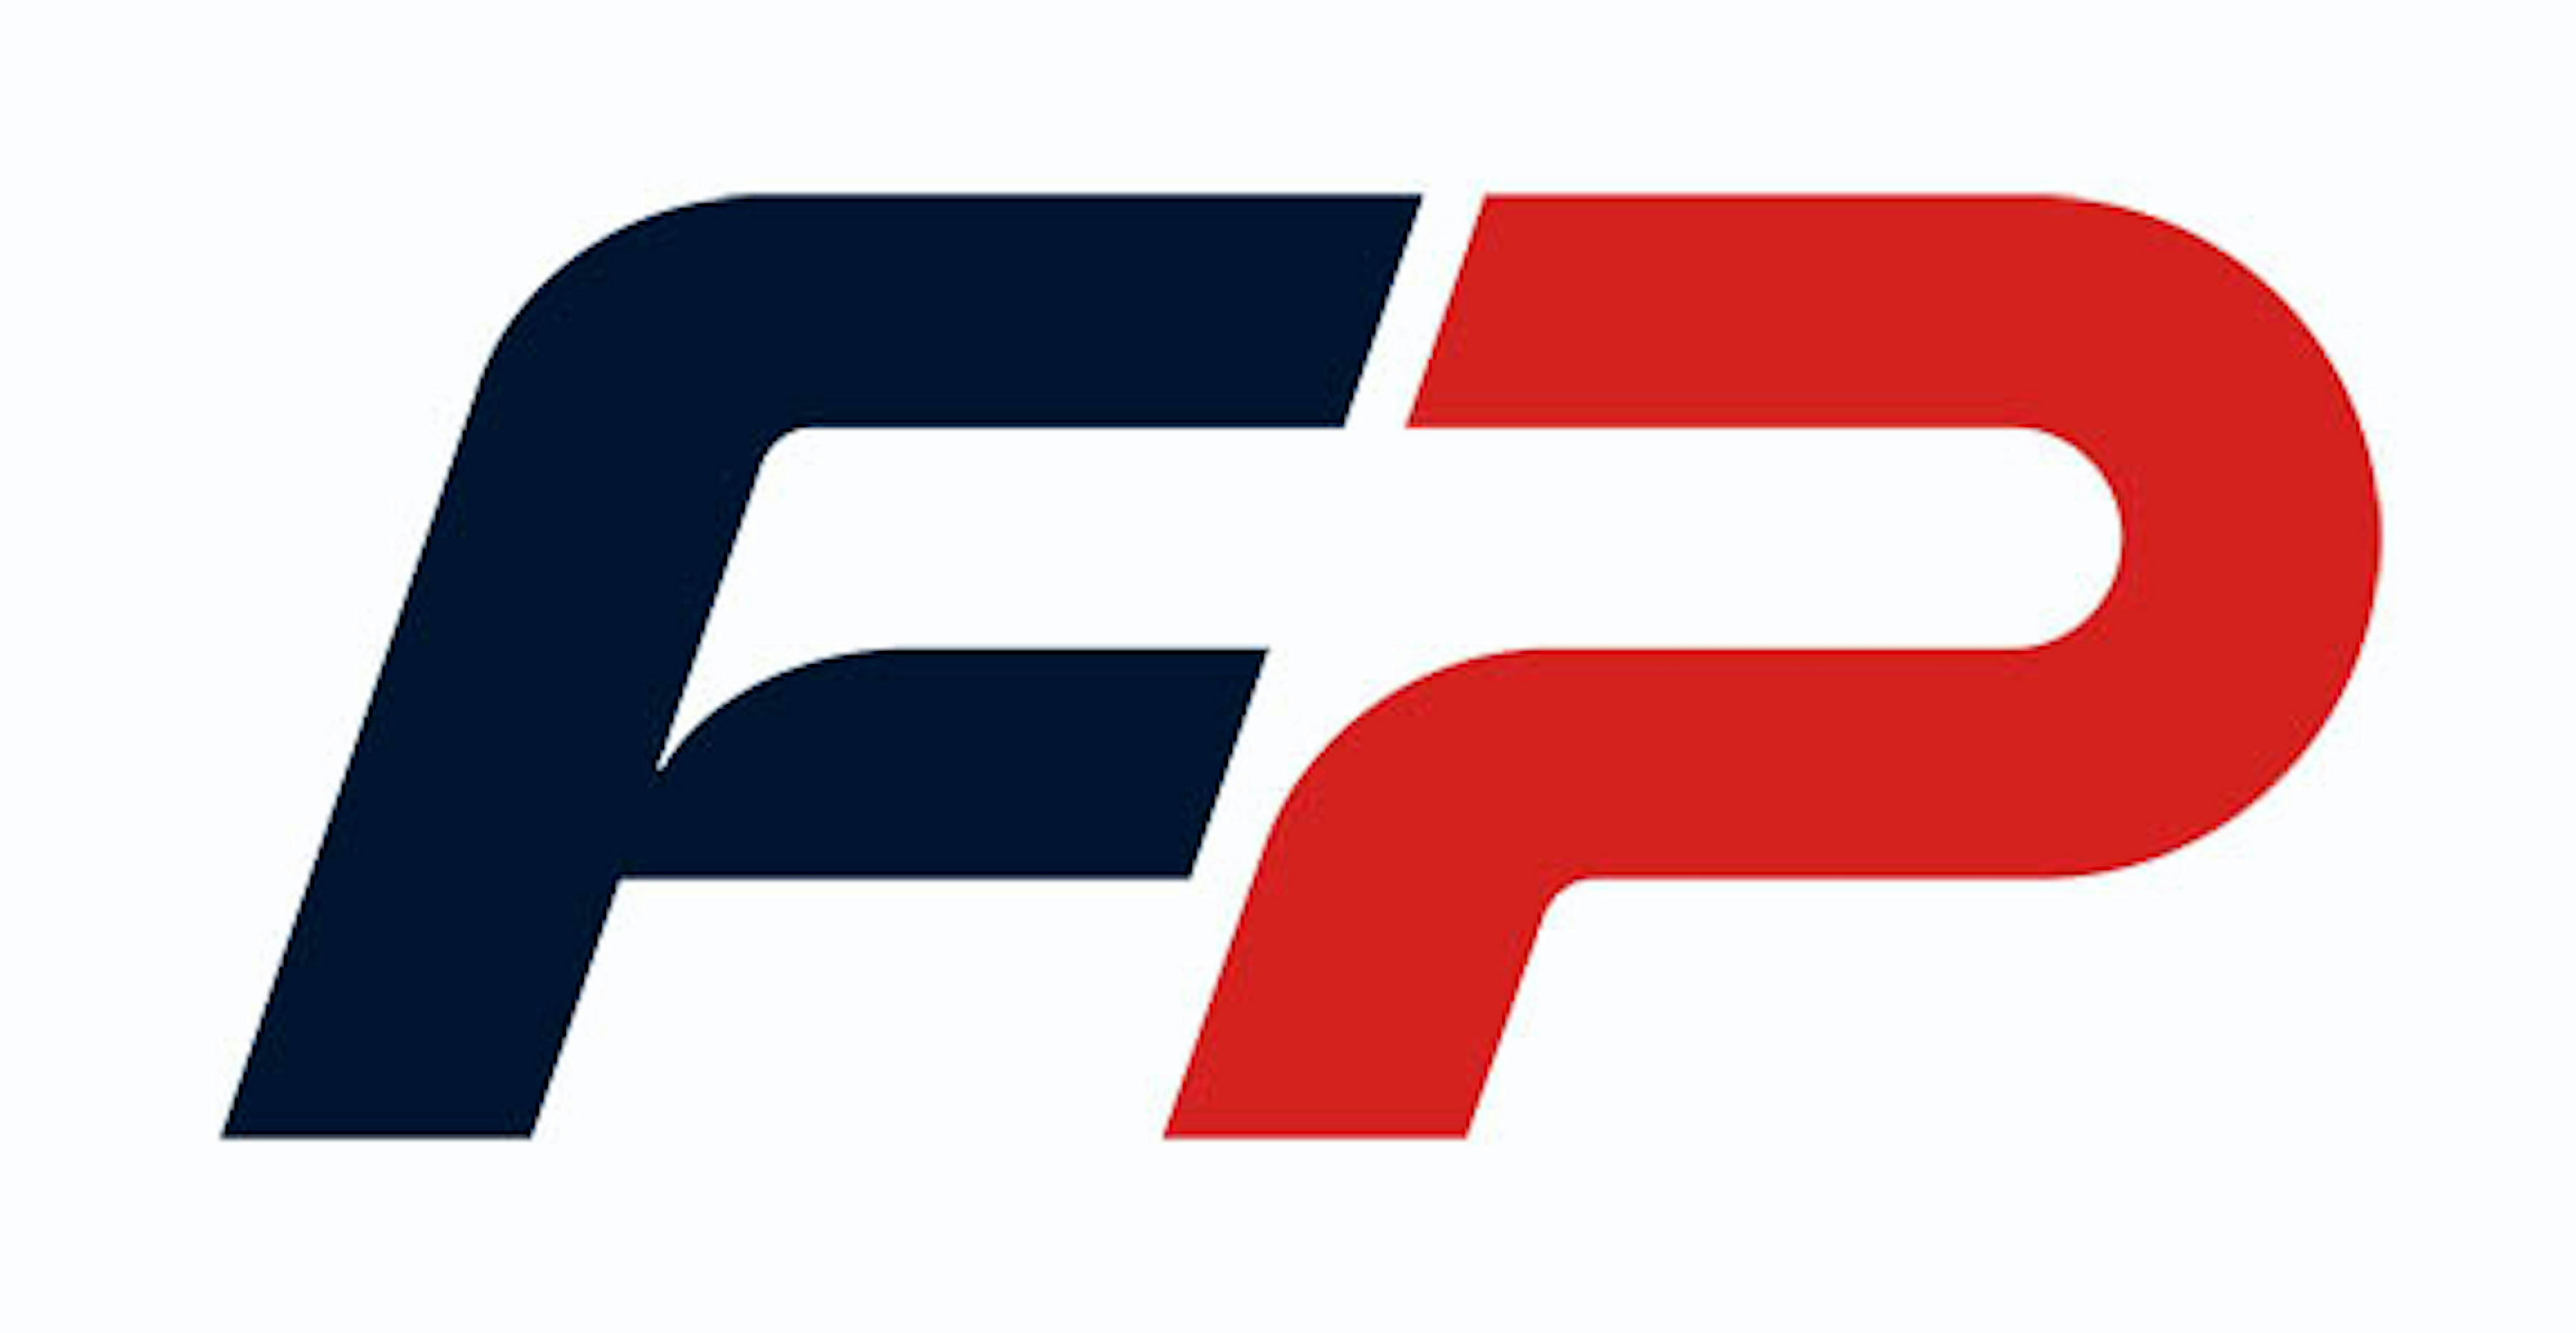 https://static.wikia.nocookie.net/piston-cup/images/1/11/Ford_Performance_Logo_%28New_Logo%29.png/revision/latest/scale-to-width-down/3600?cb=20230713044604